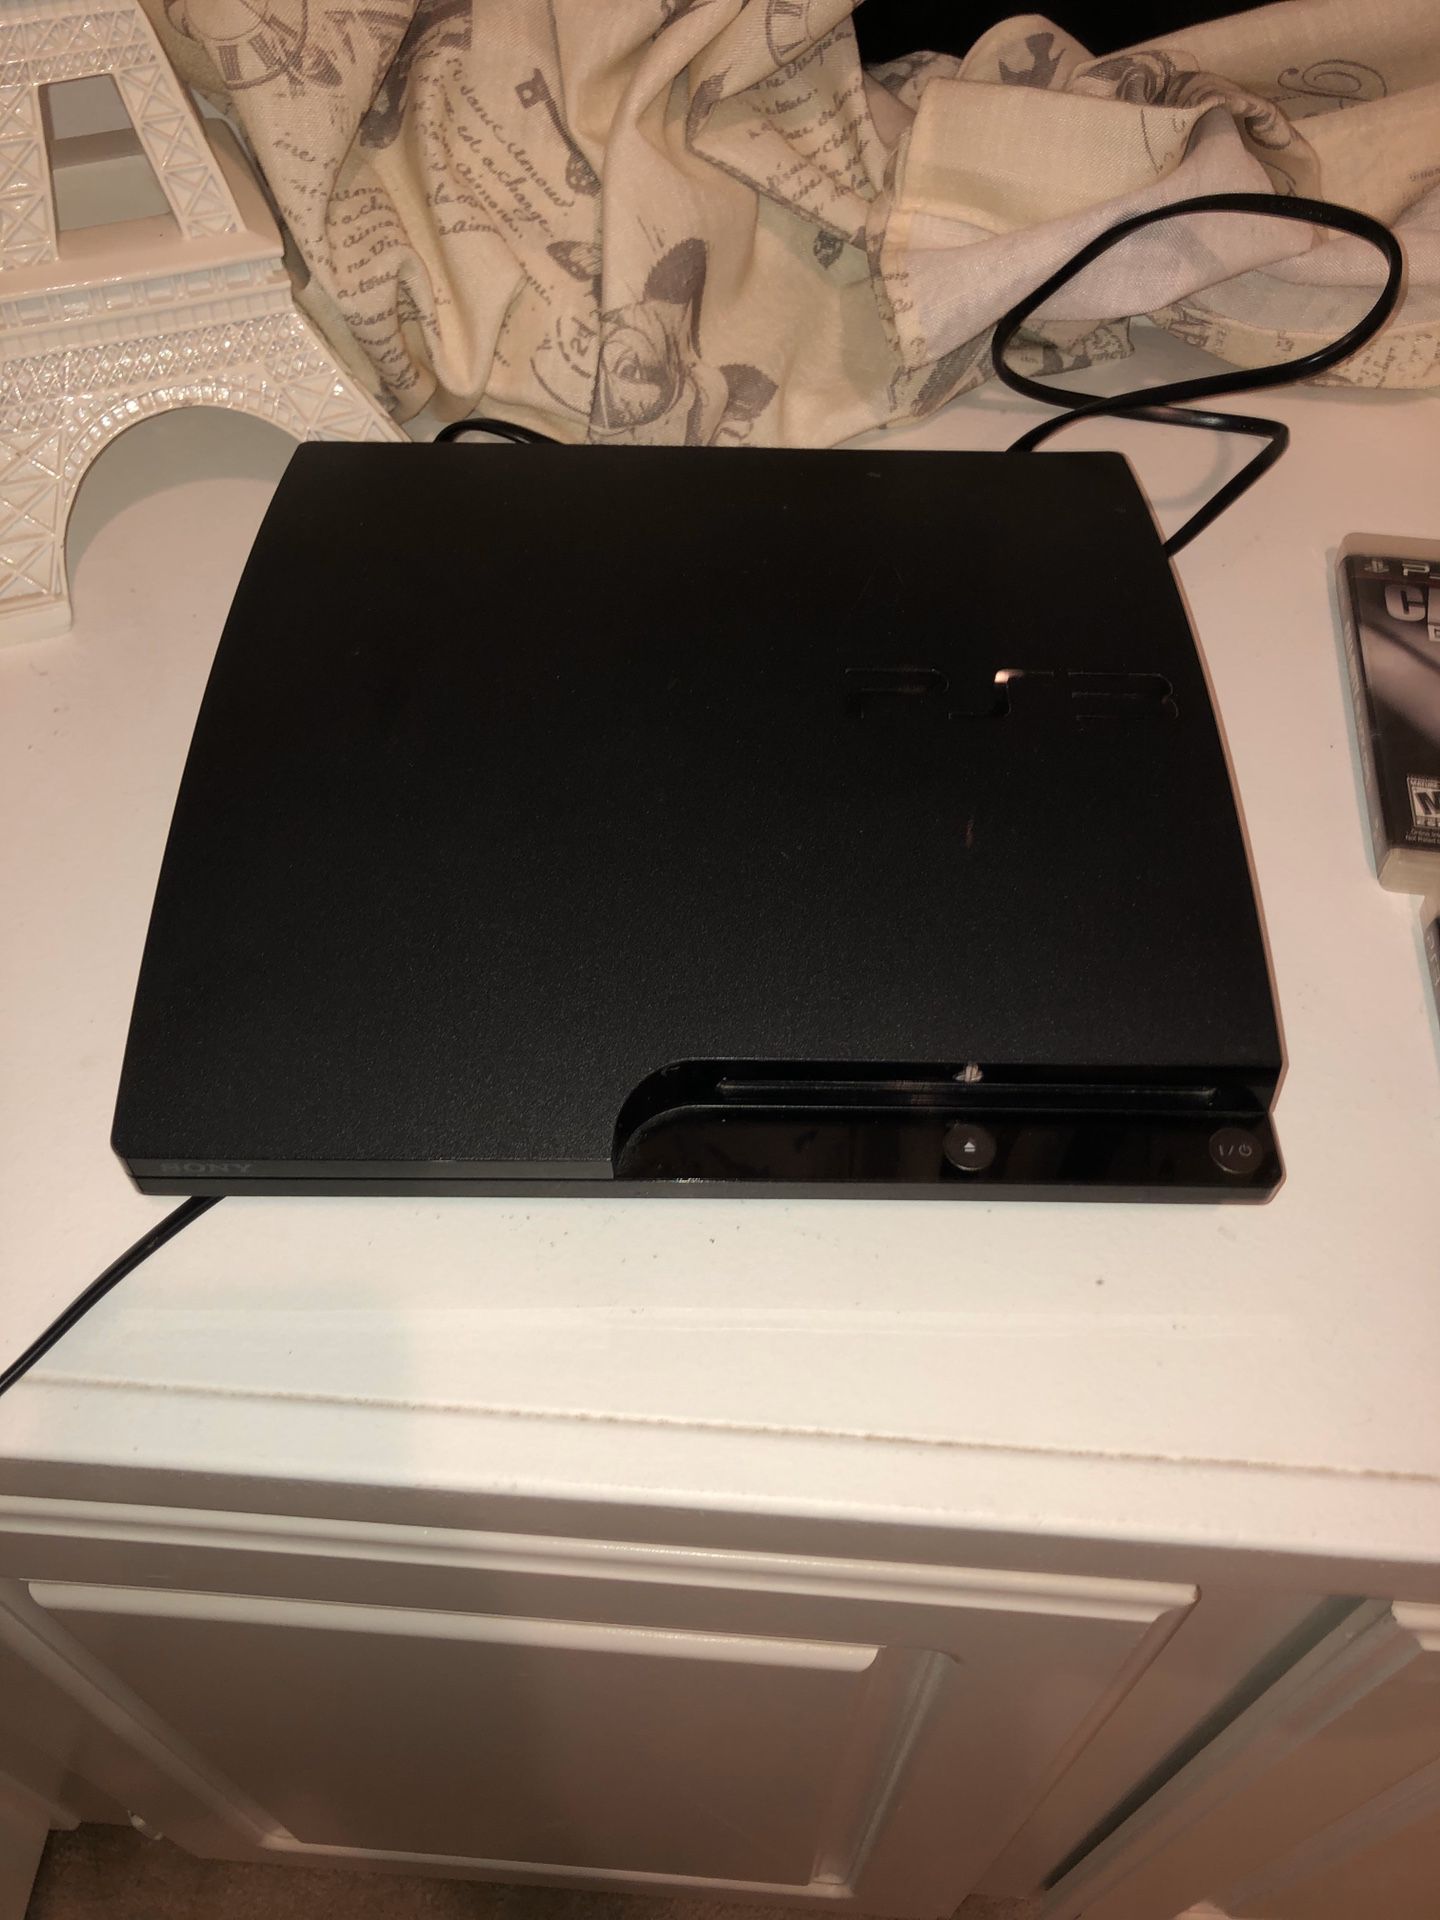 PS3 with 9 games included